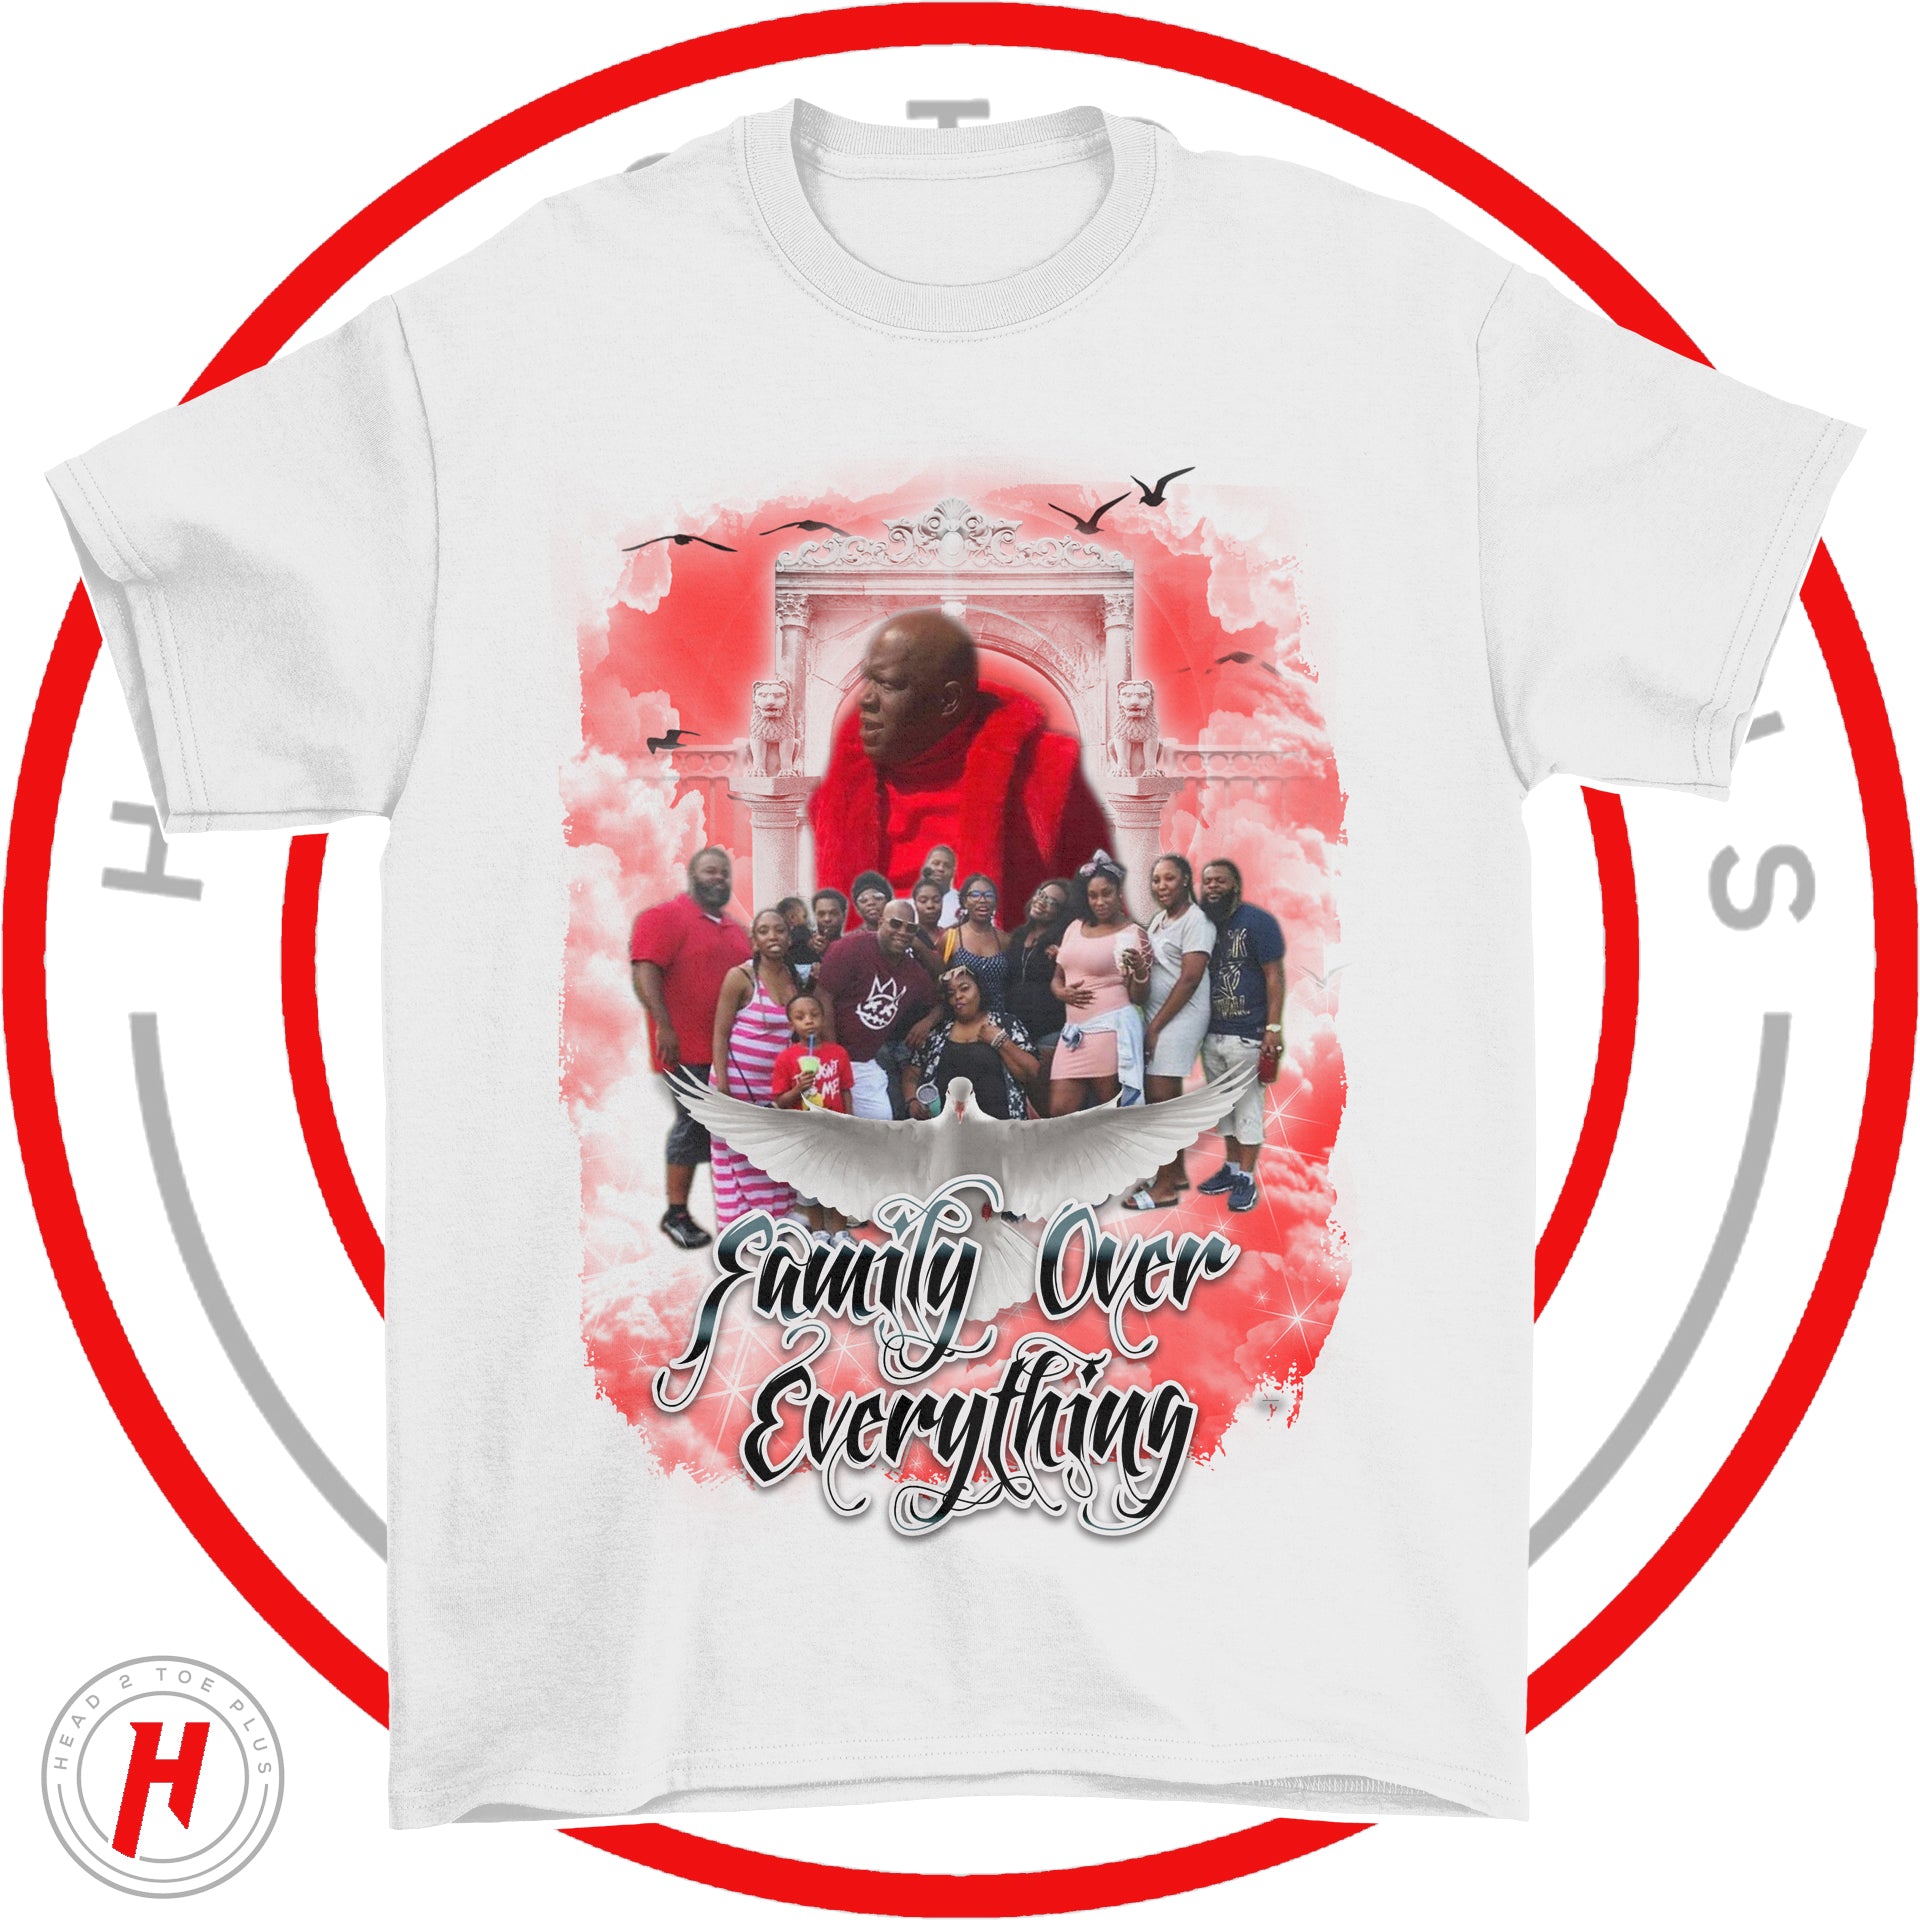 Loving Memory T-Shirts for Sale